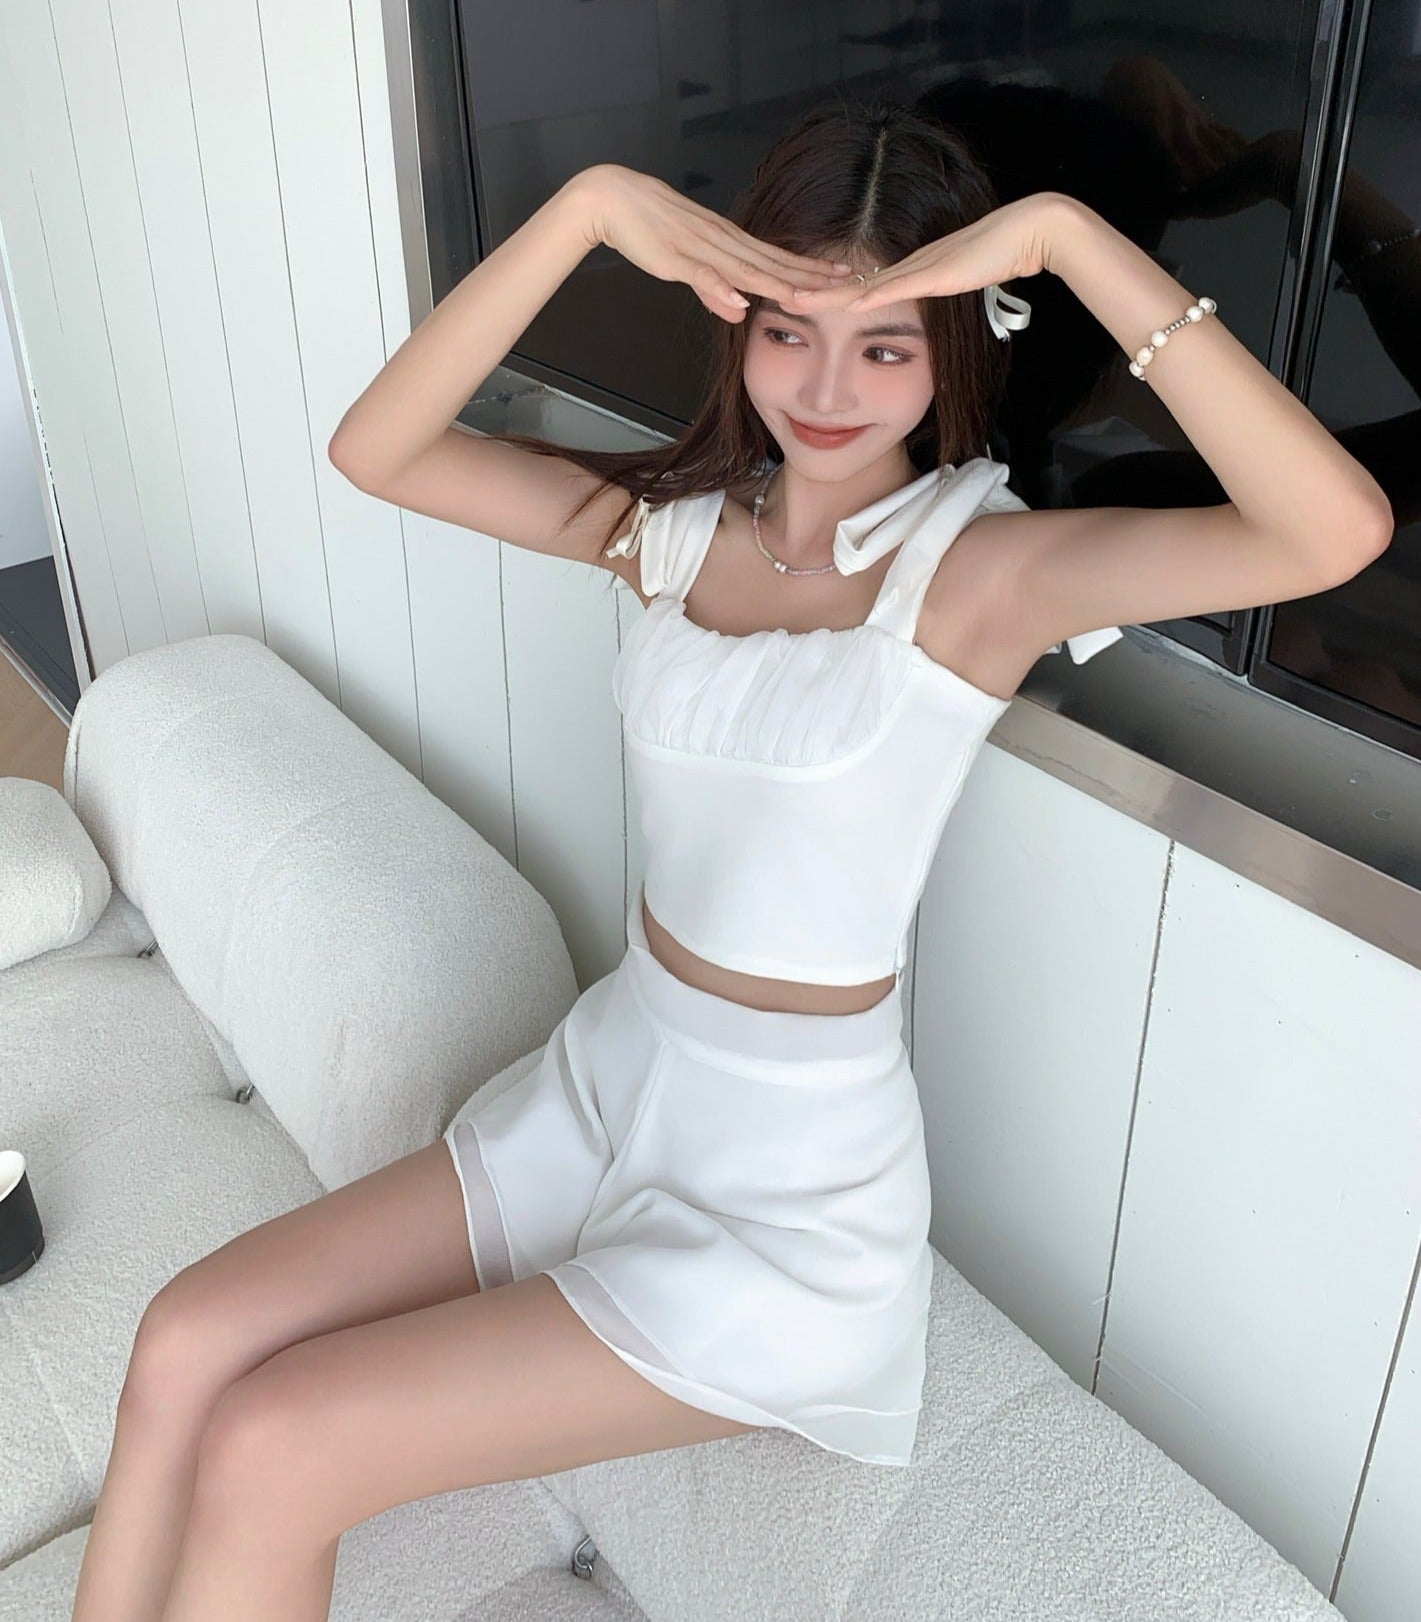 ANNA KNOT TIE SHEER TOP IN WHITE UQ MADE